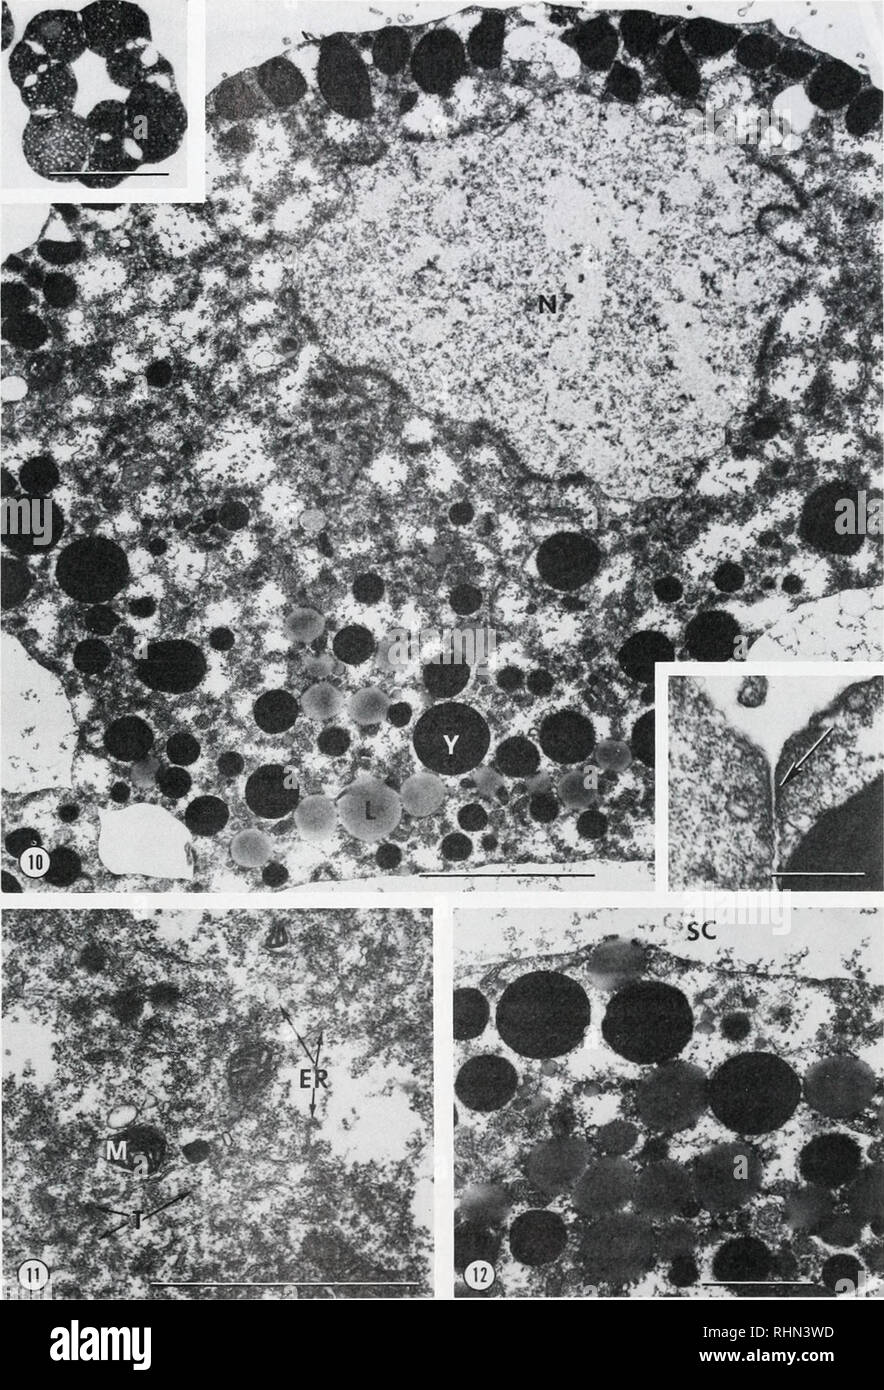 . The Biological bulletin. Biology; Zoology; Biology; Marine Biology. LOCALIZATION IN CHAETOPTERUS 233. FIGURES 10-12. Figure 10. Electron micrograph of a section through a blastomere of a 16-cell embryo. Note polarization of the cell with apical nucleus (N) and basal endoplasm with lipid (L) and yolk (Y). Scale bar = 5.0 jim. Upper inset: light micrograph of a section through a 16-cell embryo. Scale bar = 100 ^m. Lower inset: electron micrograph showing a desmosome (arrow) at the junction between adjacent blastomeres. Scale bar = 1.0 ^m. Figure 11. Section through the hyaloplasm of a 16-cell  Stock Photo